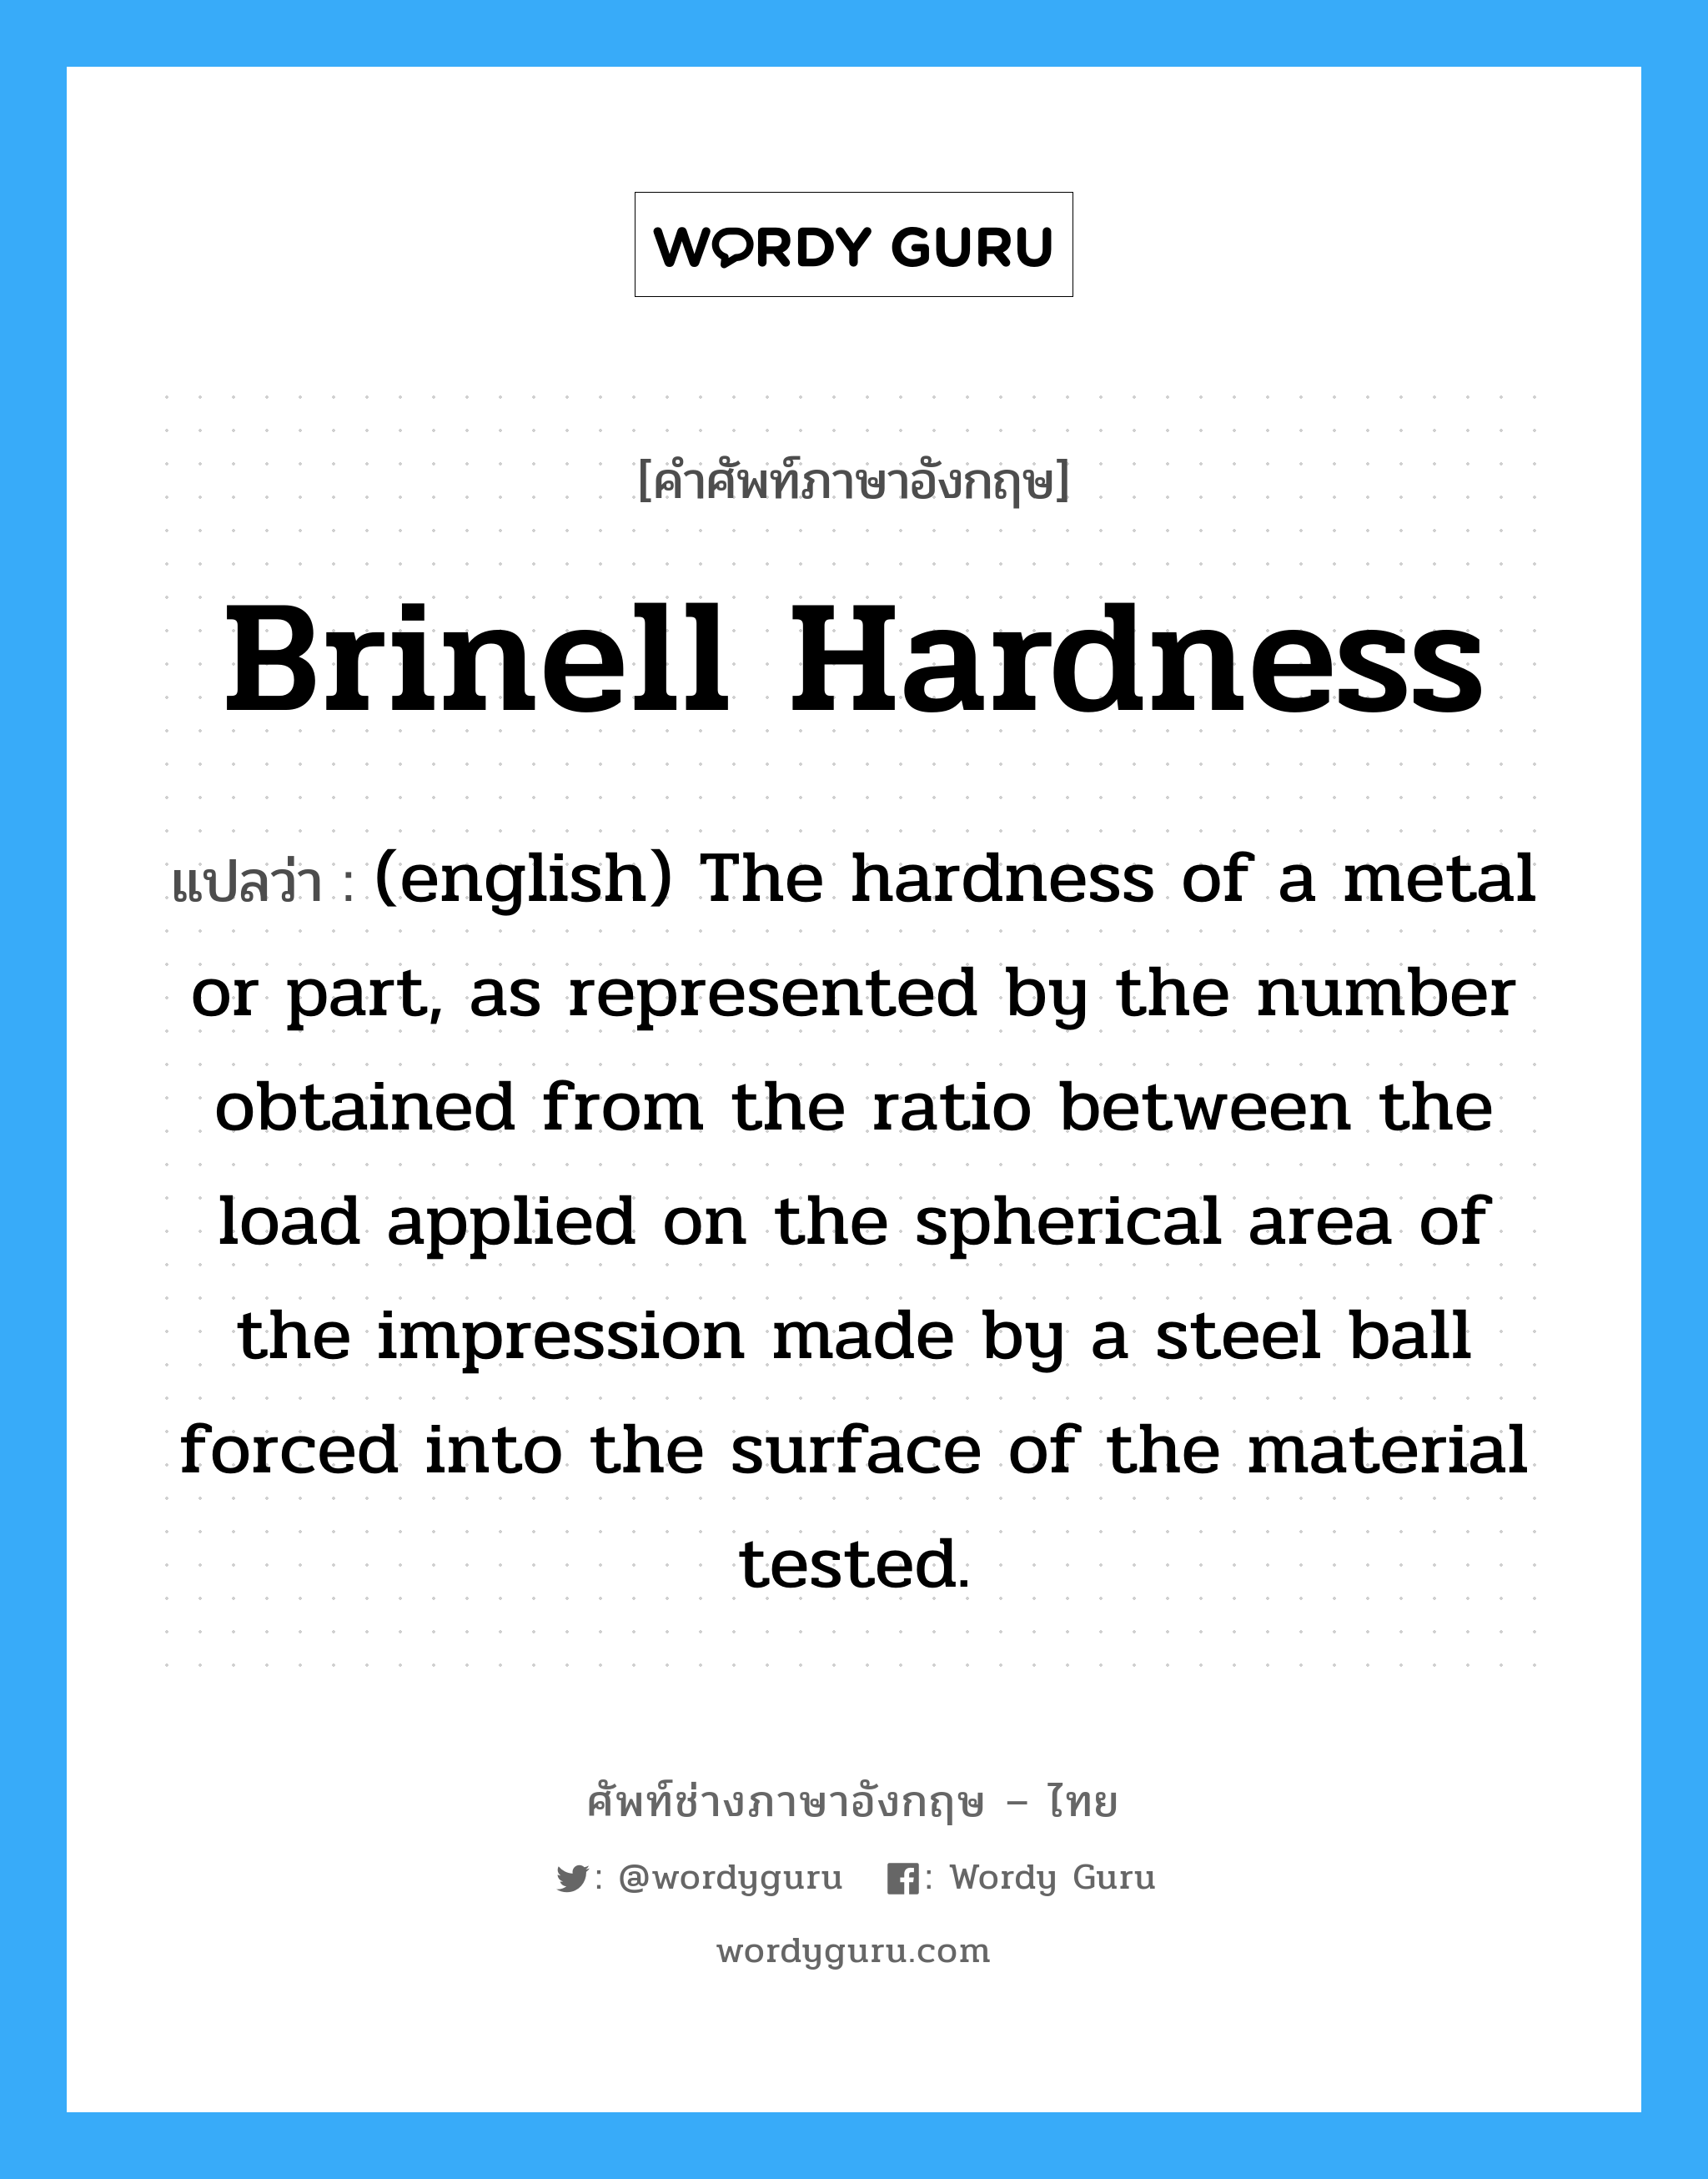 Brinell Hardness แปลว่า?, คำศัพท์ช่างภาษาอังกฤษ - ไทย Brinell Hardness คำศัพท์ภาษาอังกฤษ Brinell Hardness แปลว่า (english) The hardness of a metal or part, as represented by the number obtained from the ratio between the load applied on the spherical area of the impression made by a steel ball forced into the surface of the material tested.